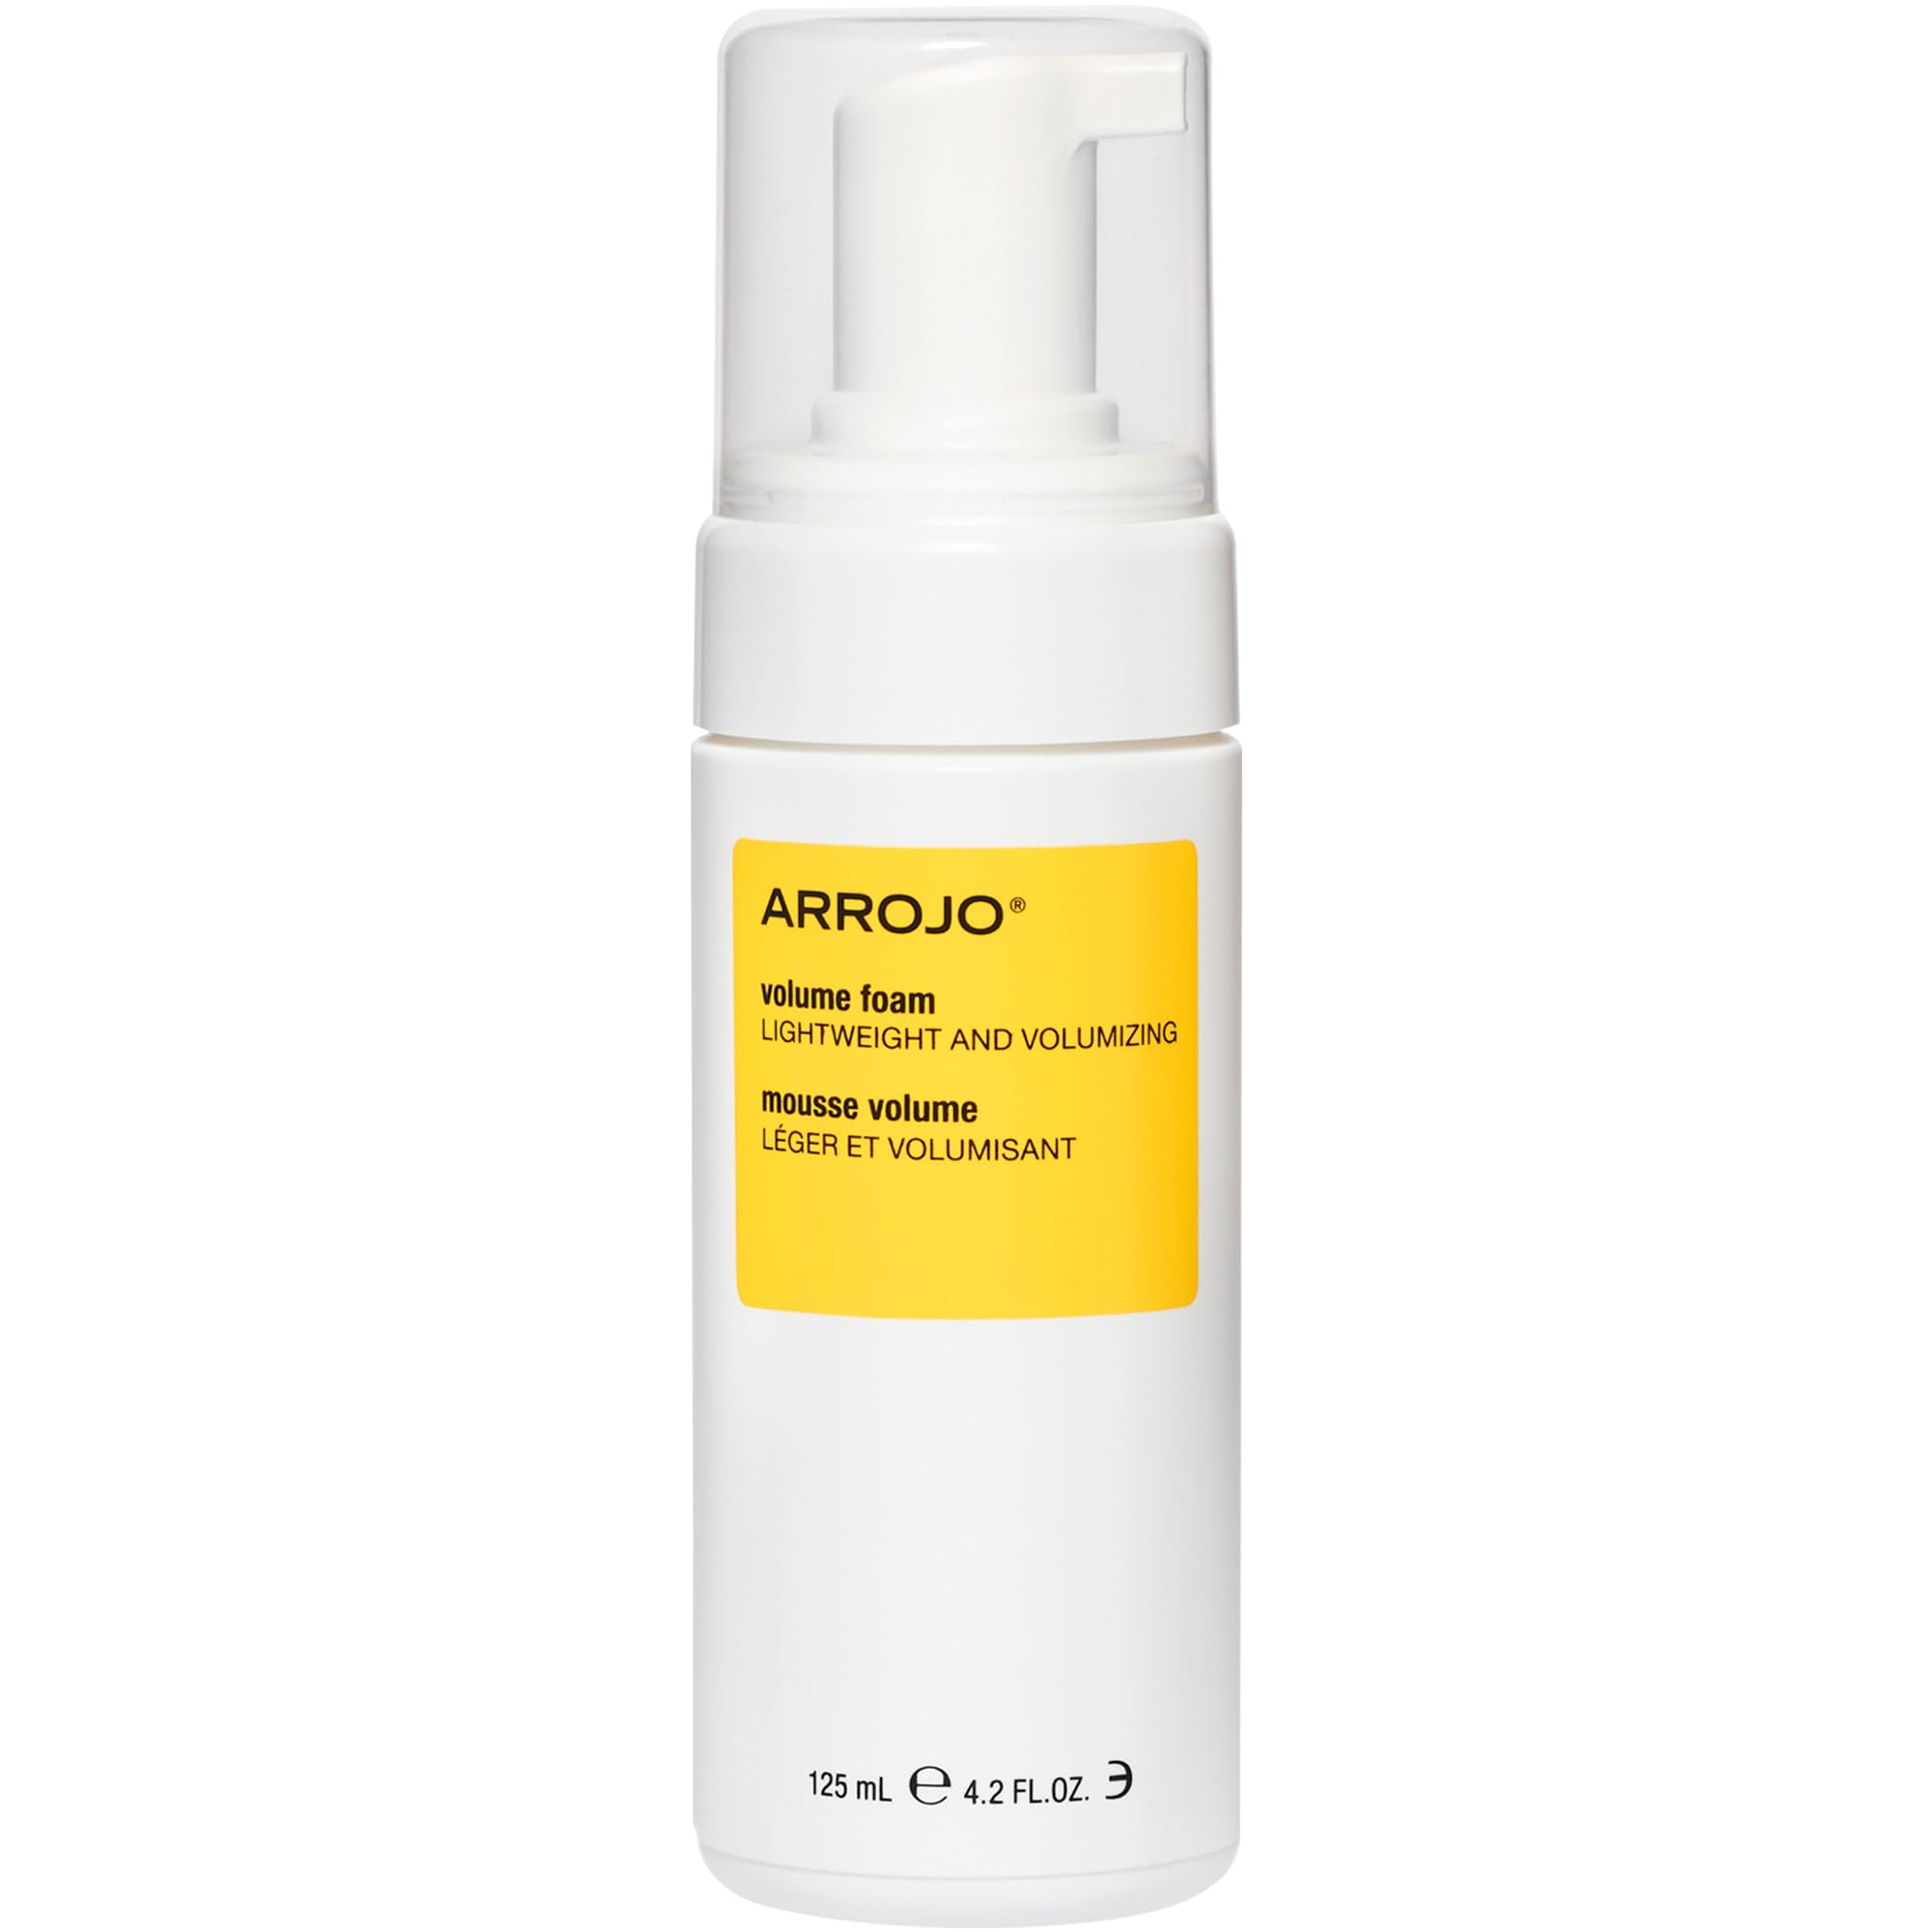 Mousse for Hair Volume - Sulfate-Free, Paraben-Free Hair Foam Mousse - Volumizing Mousse for Fine Hair with Vitamin B5, Amino Acids, & Flower Oil - Volume Booster Foam for Men & Women by Arrojo, 4.2oz